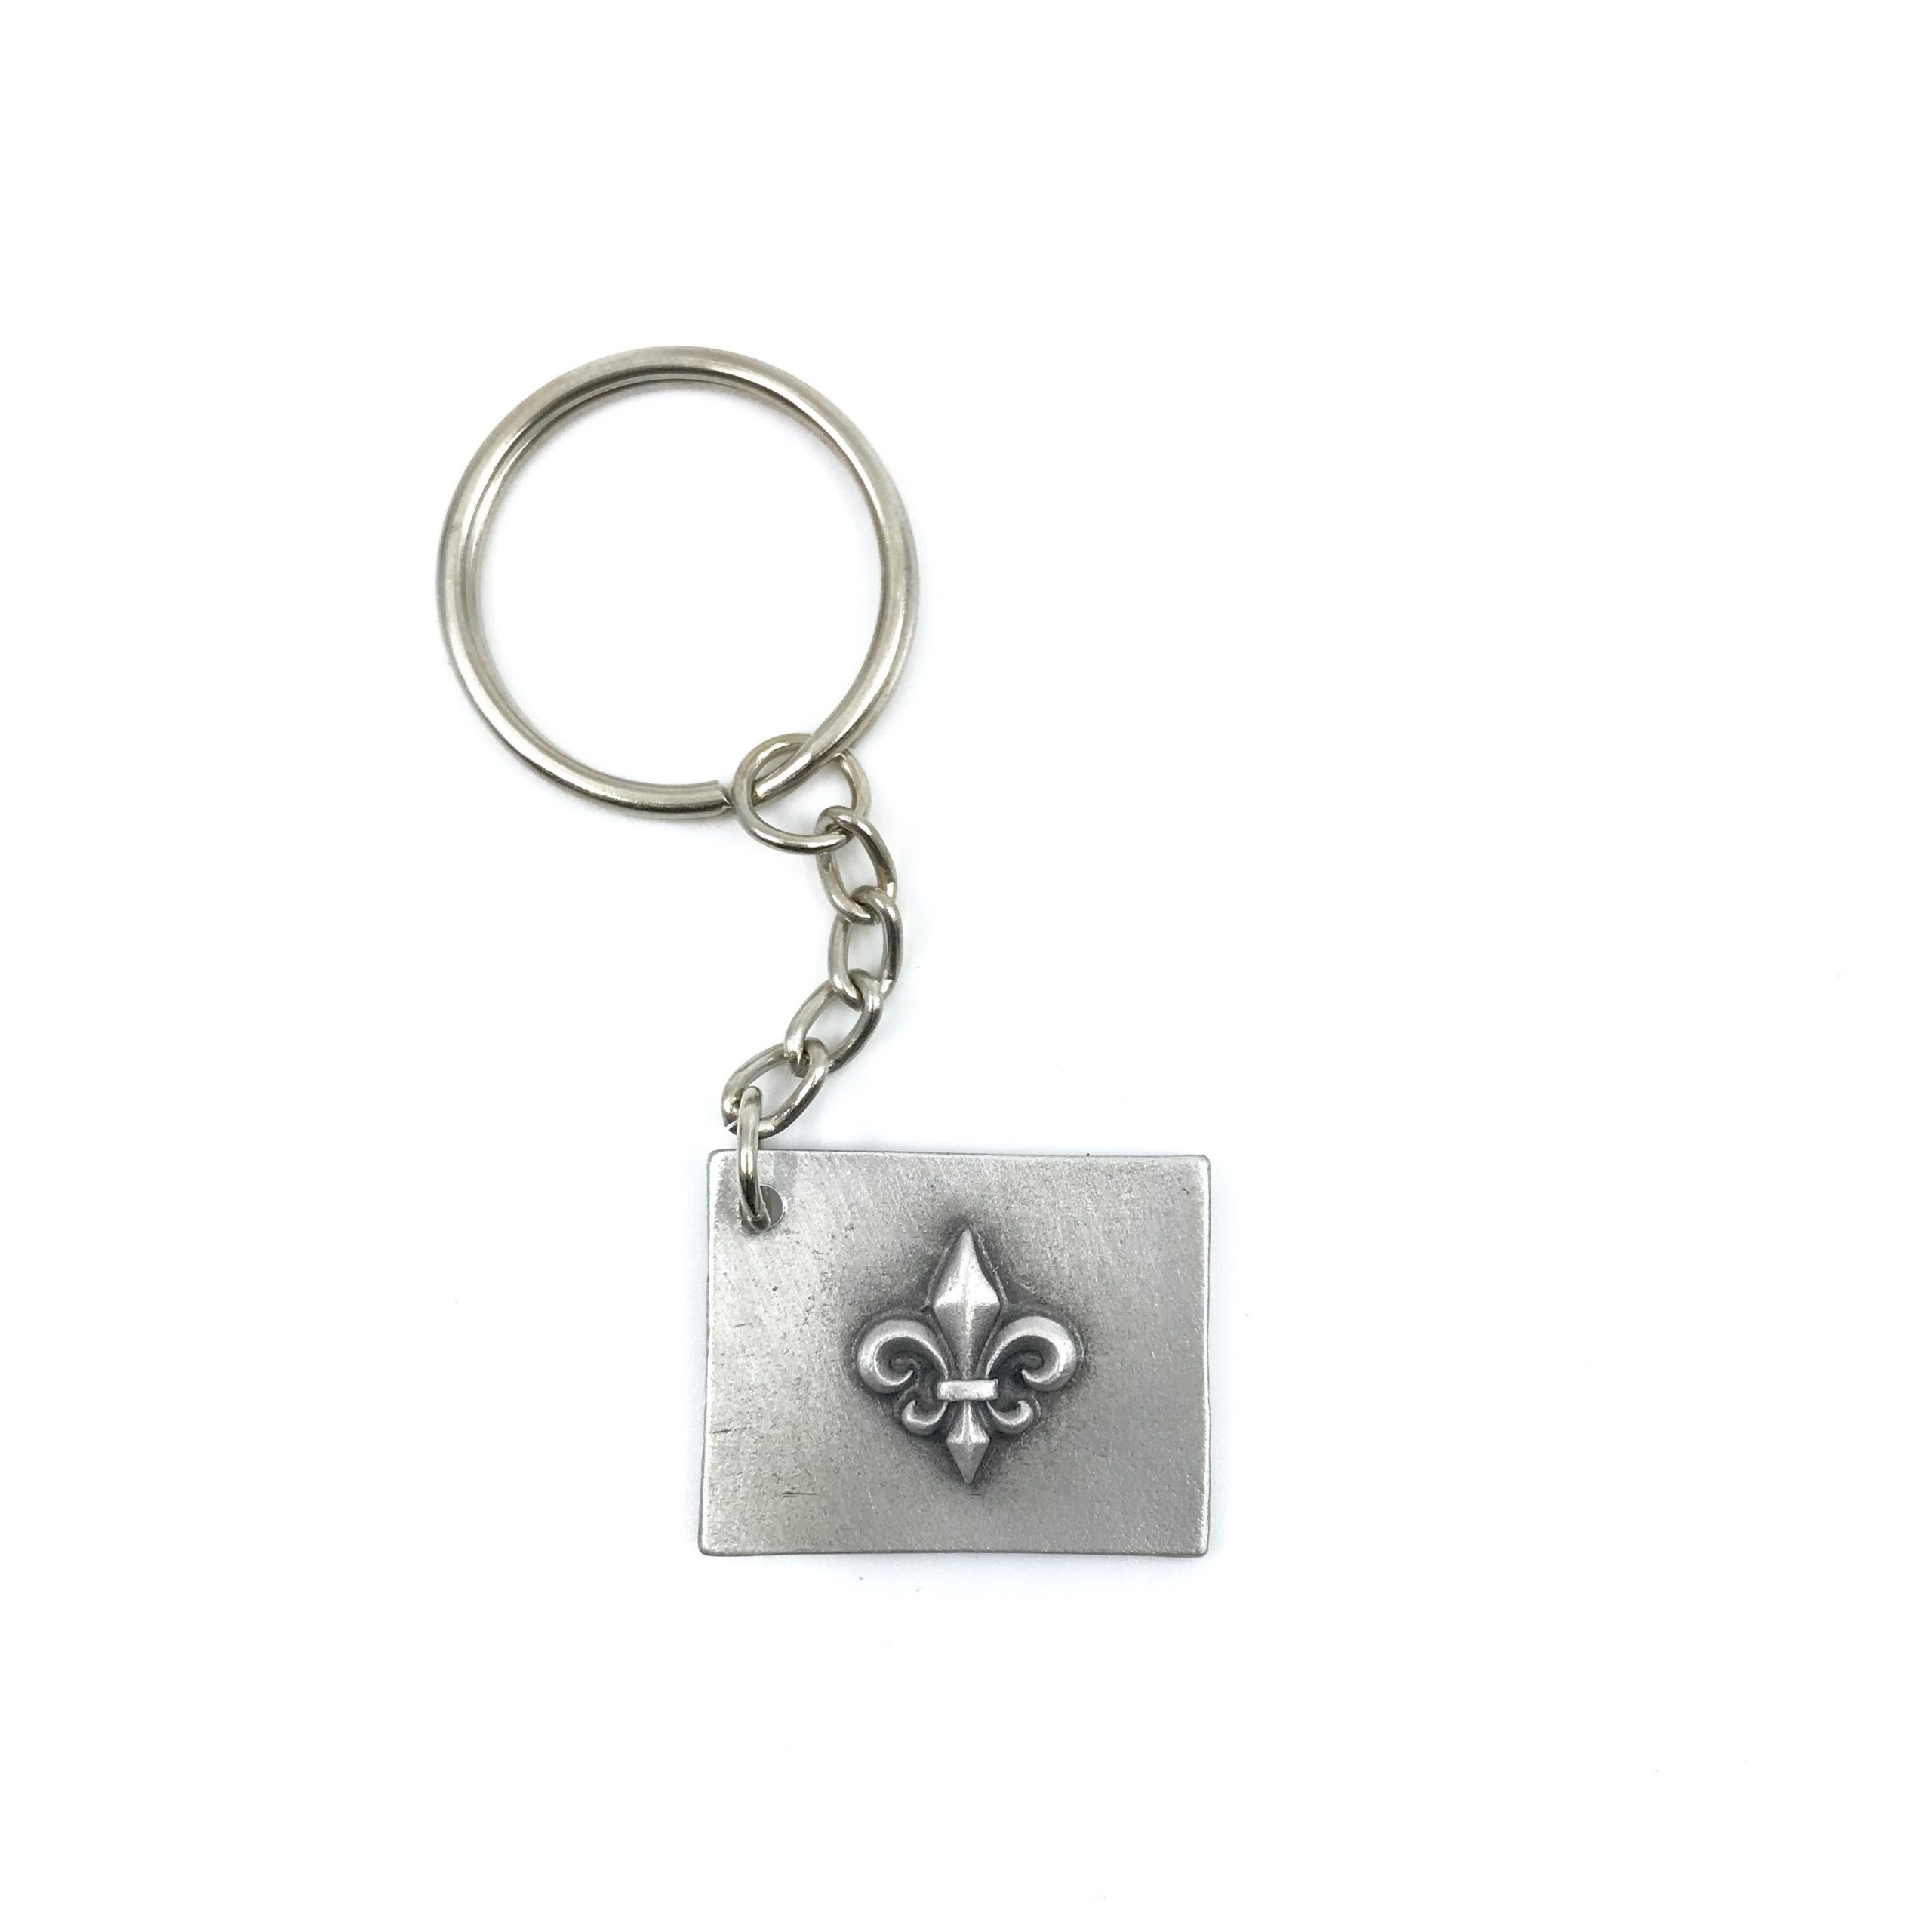 Fleur de lys keychain optional your name on the back of the product 